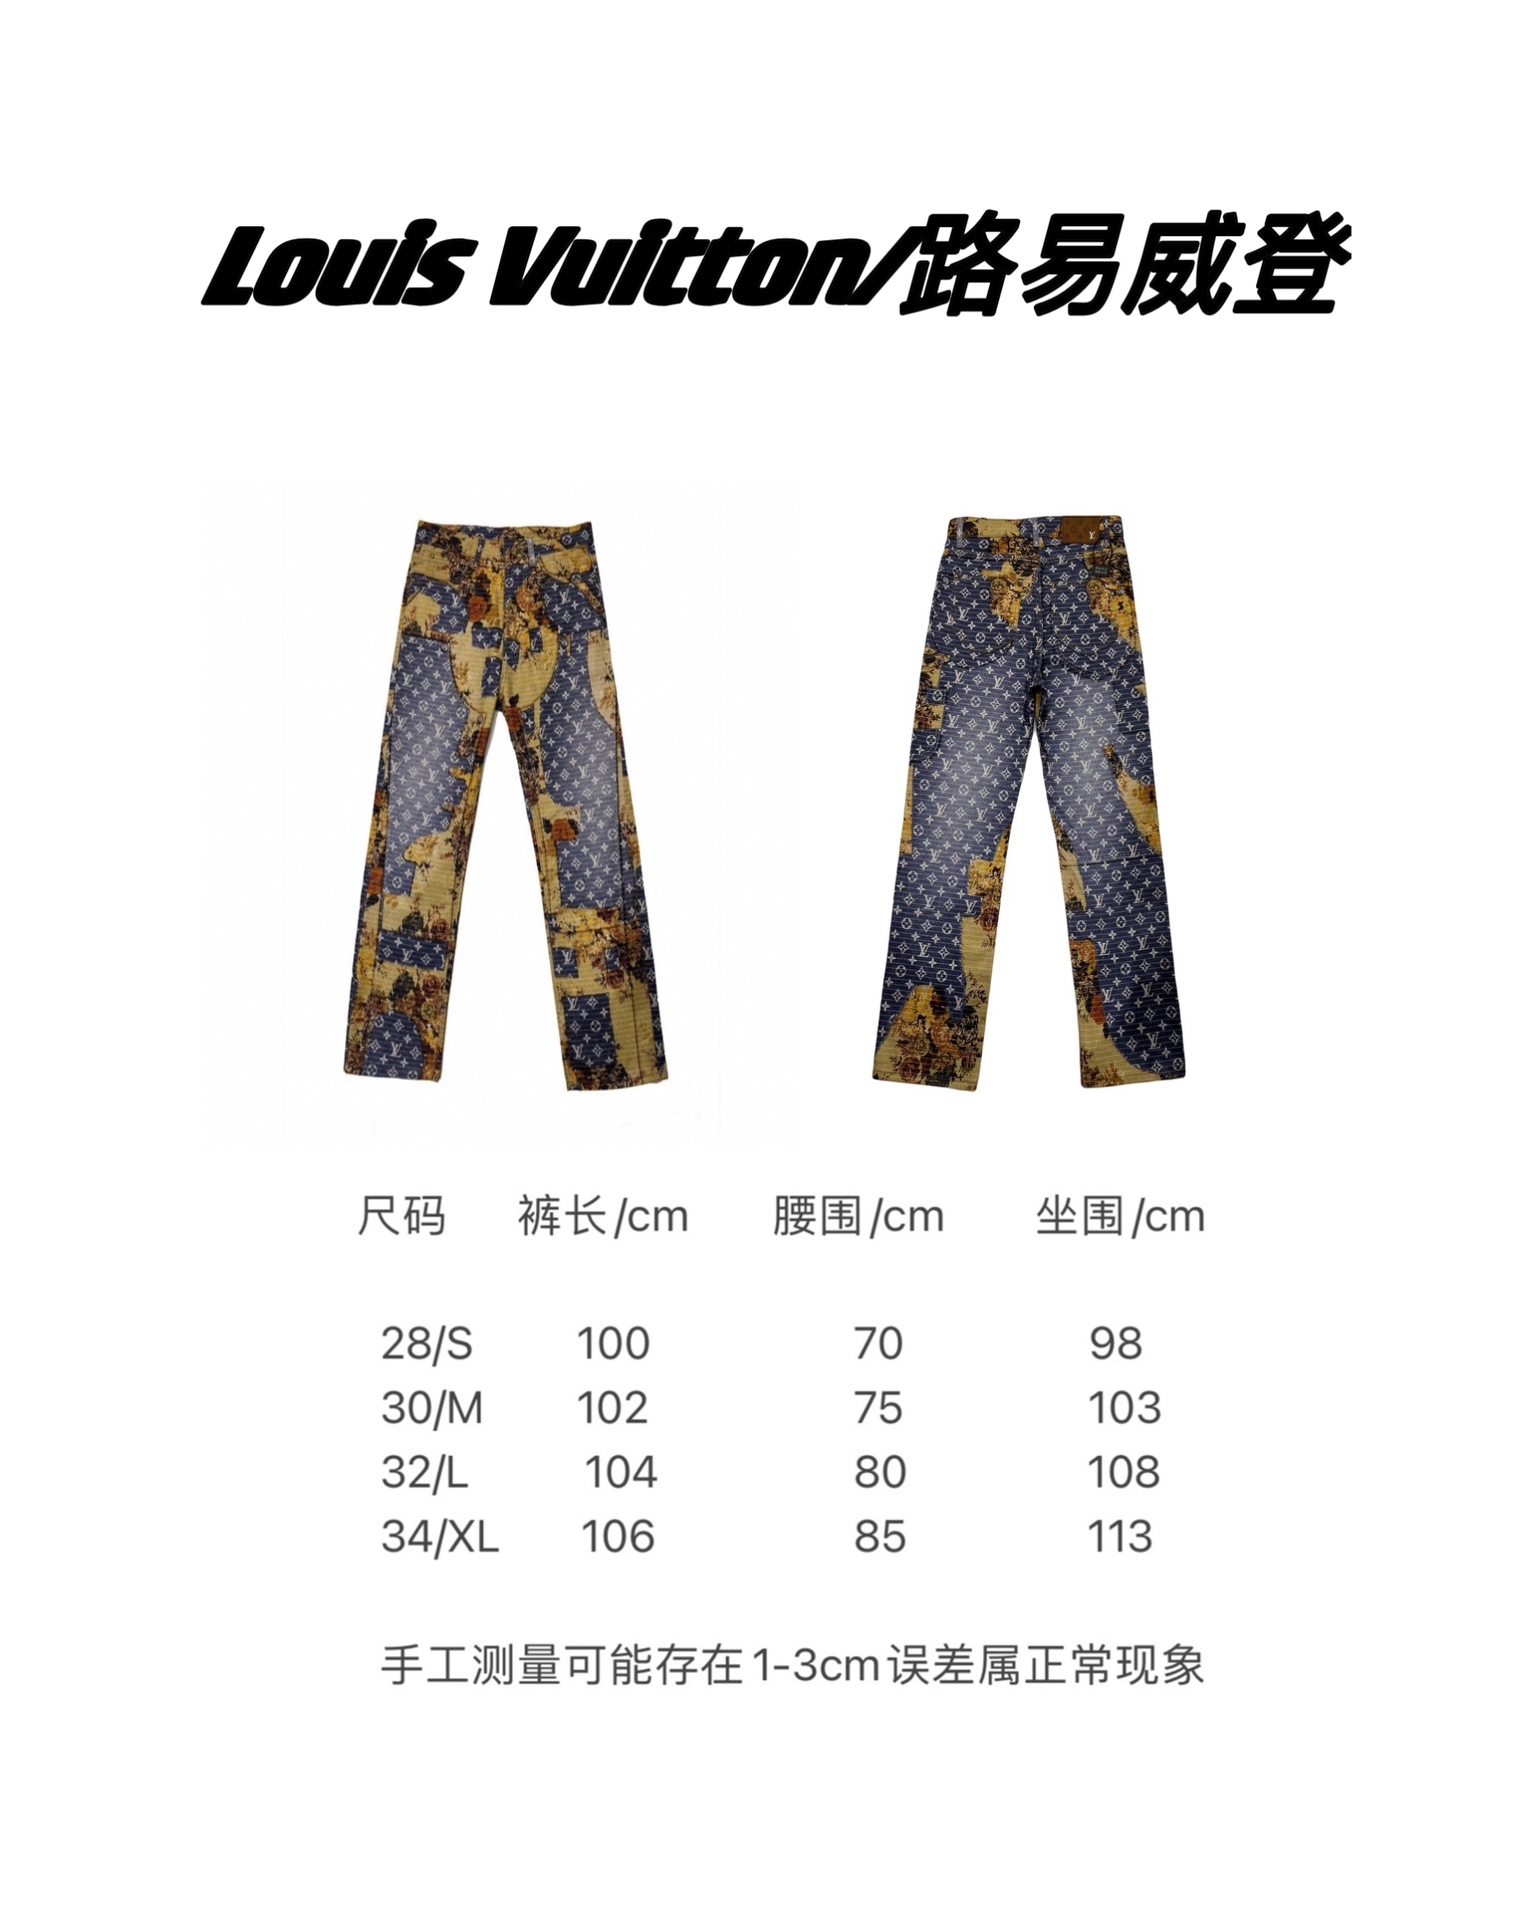 Louis Vuitton Clothing Jeans China Sale
 Printing